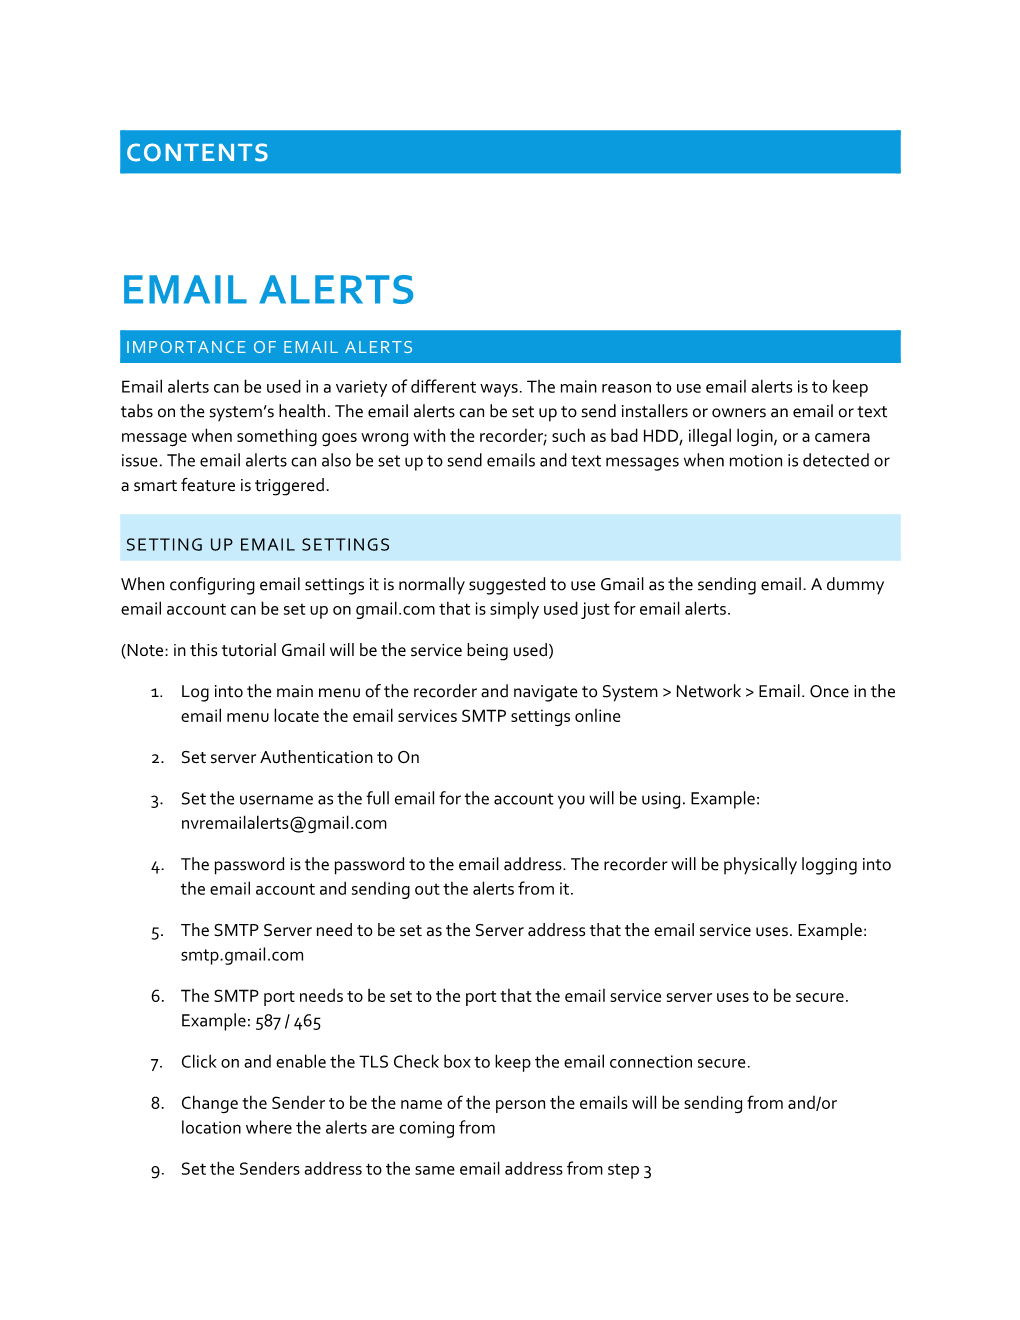 Importance of Email Alerts